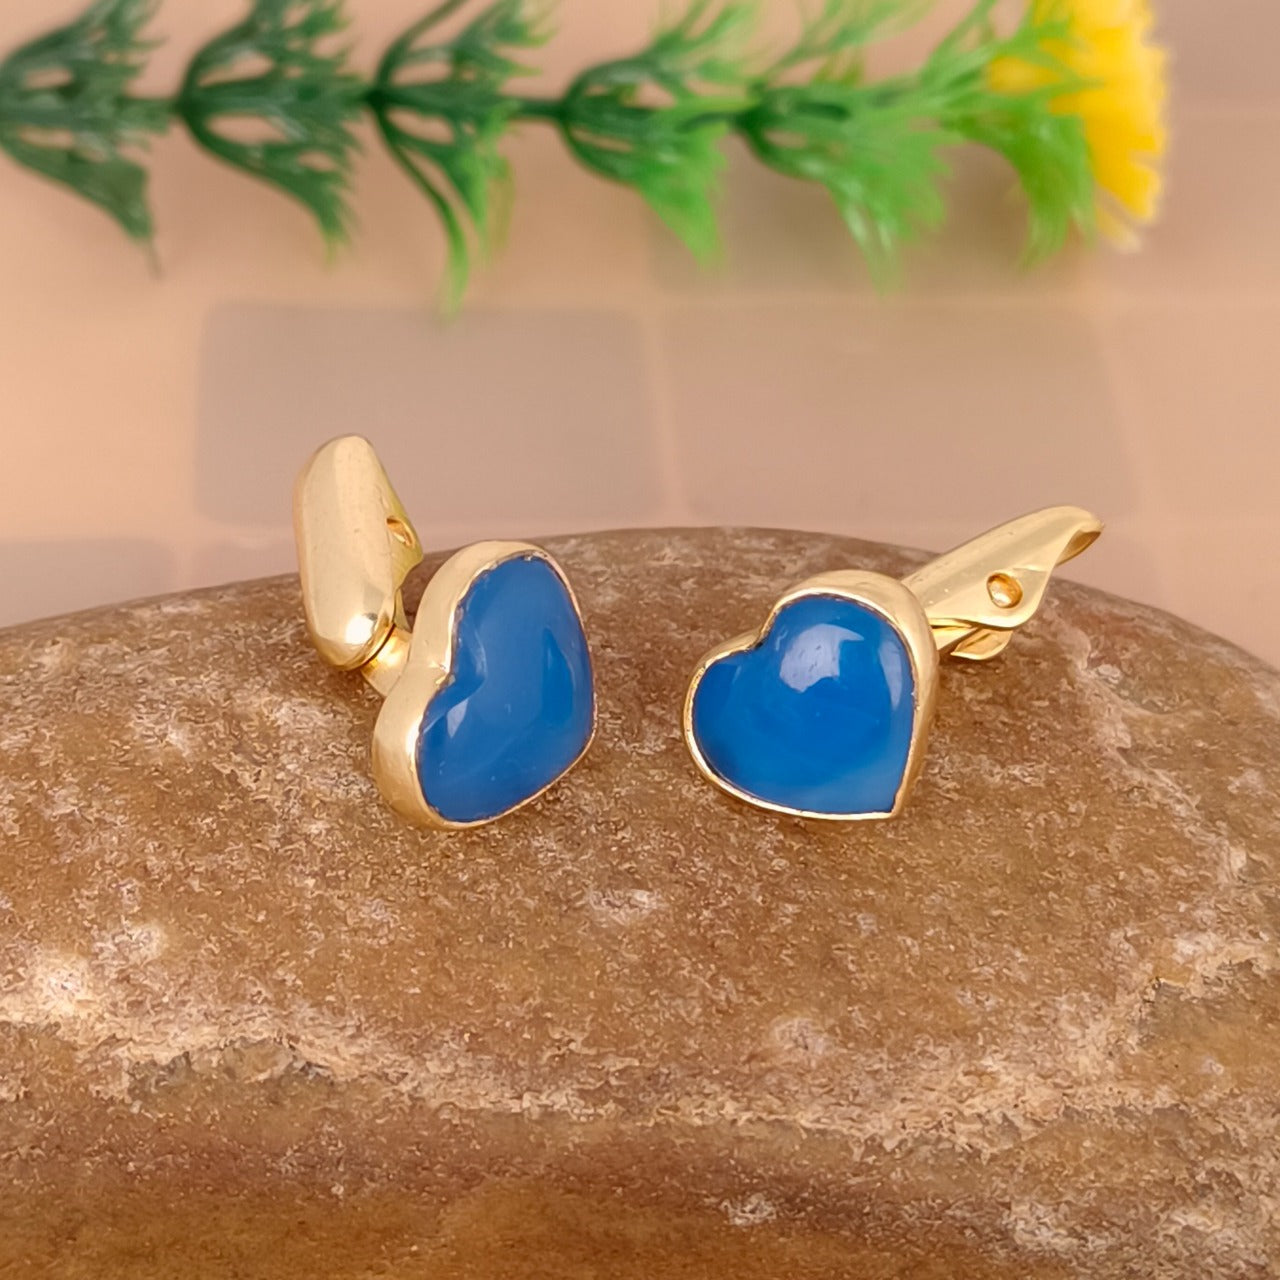 925 Sterling Silver 24kt Gold Plated Heart Shape Blue Chalcedony Stone Cufflinks For Mens